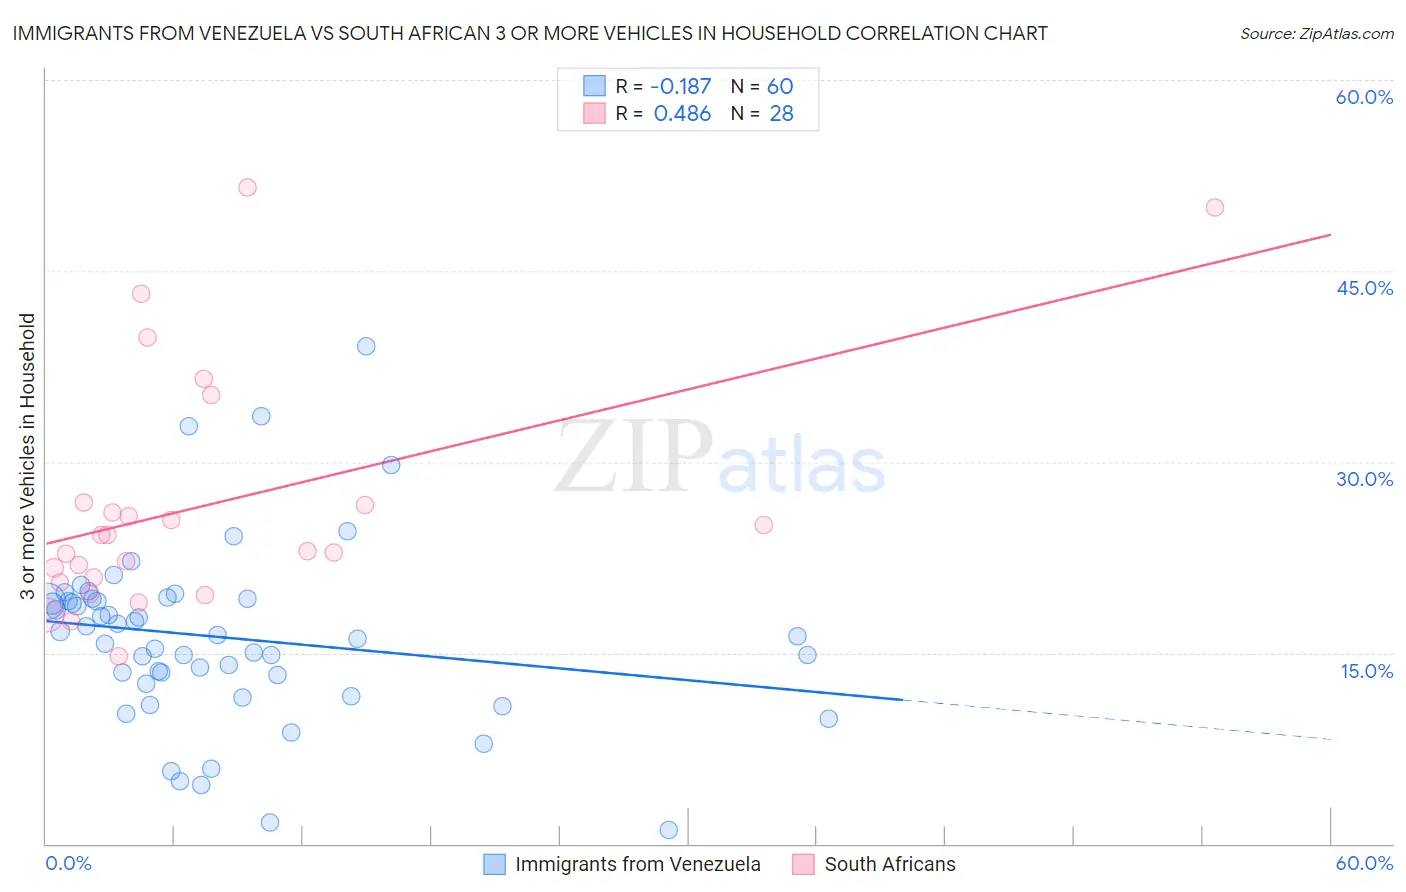 Immigrants from Venezuela vs South African 3 or more Vehicles in Household